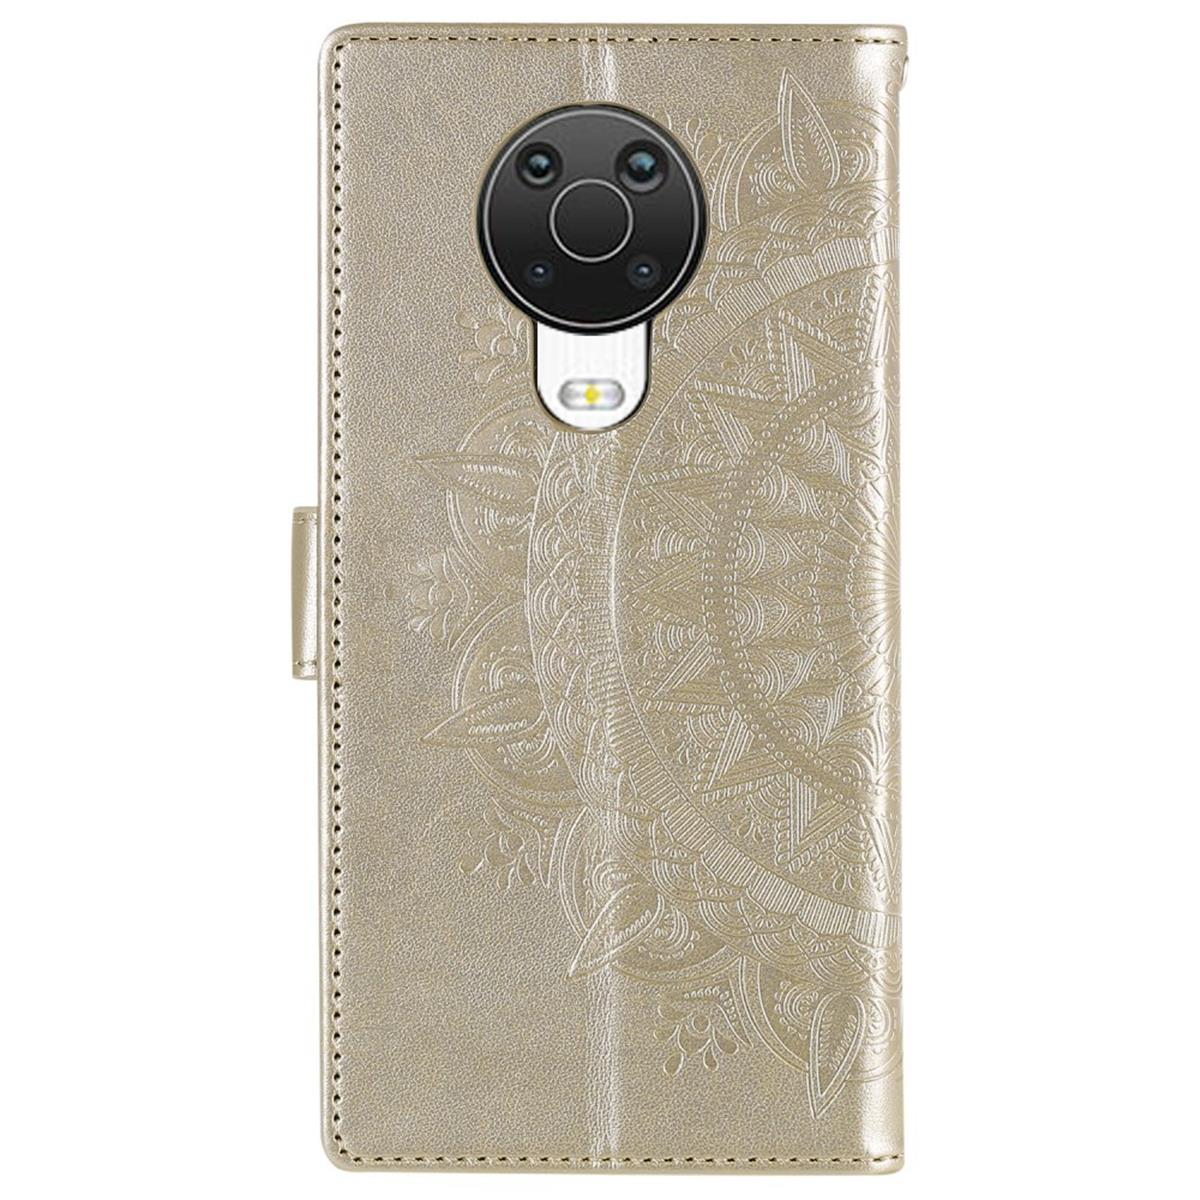 COVERKINGZ Klapphülle mit Mandala Gold Nokia, Bookcover, G10/G20, Muster